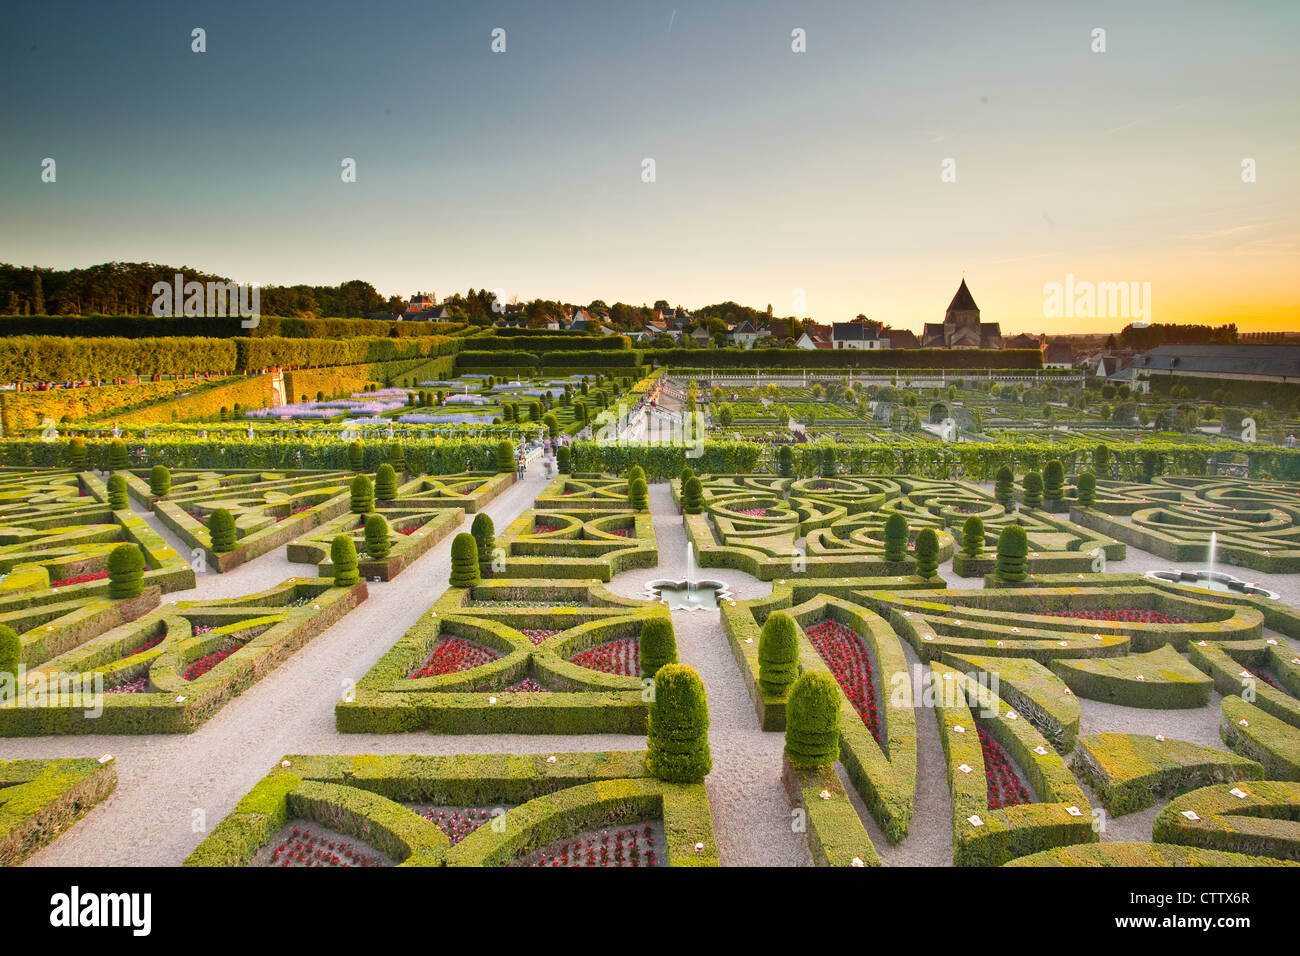 The beautiful gardens at the chateau of Villandry in the Loire Valley of France. Stock Photo